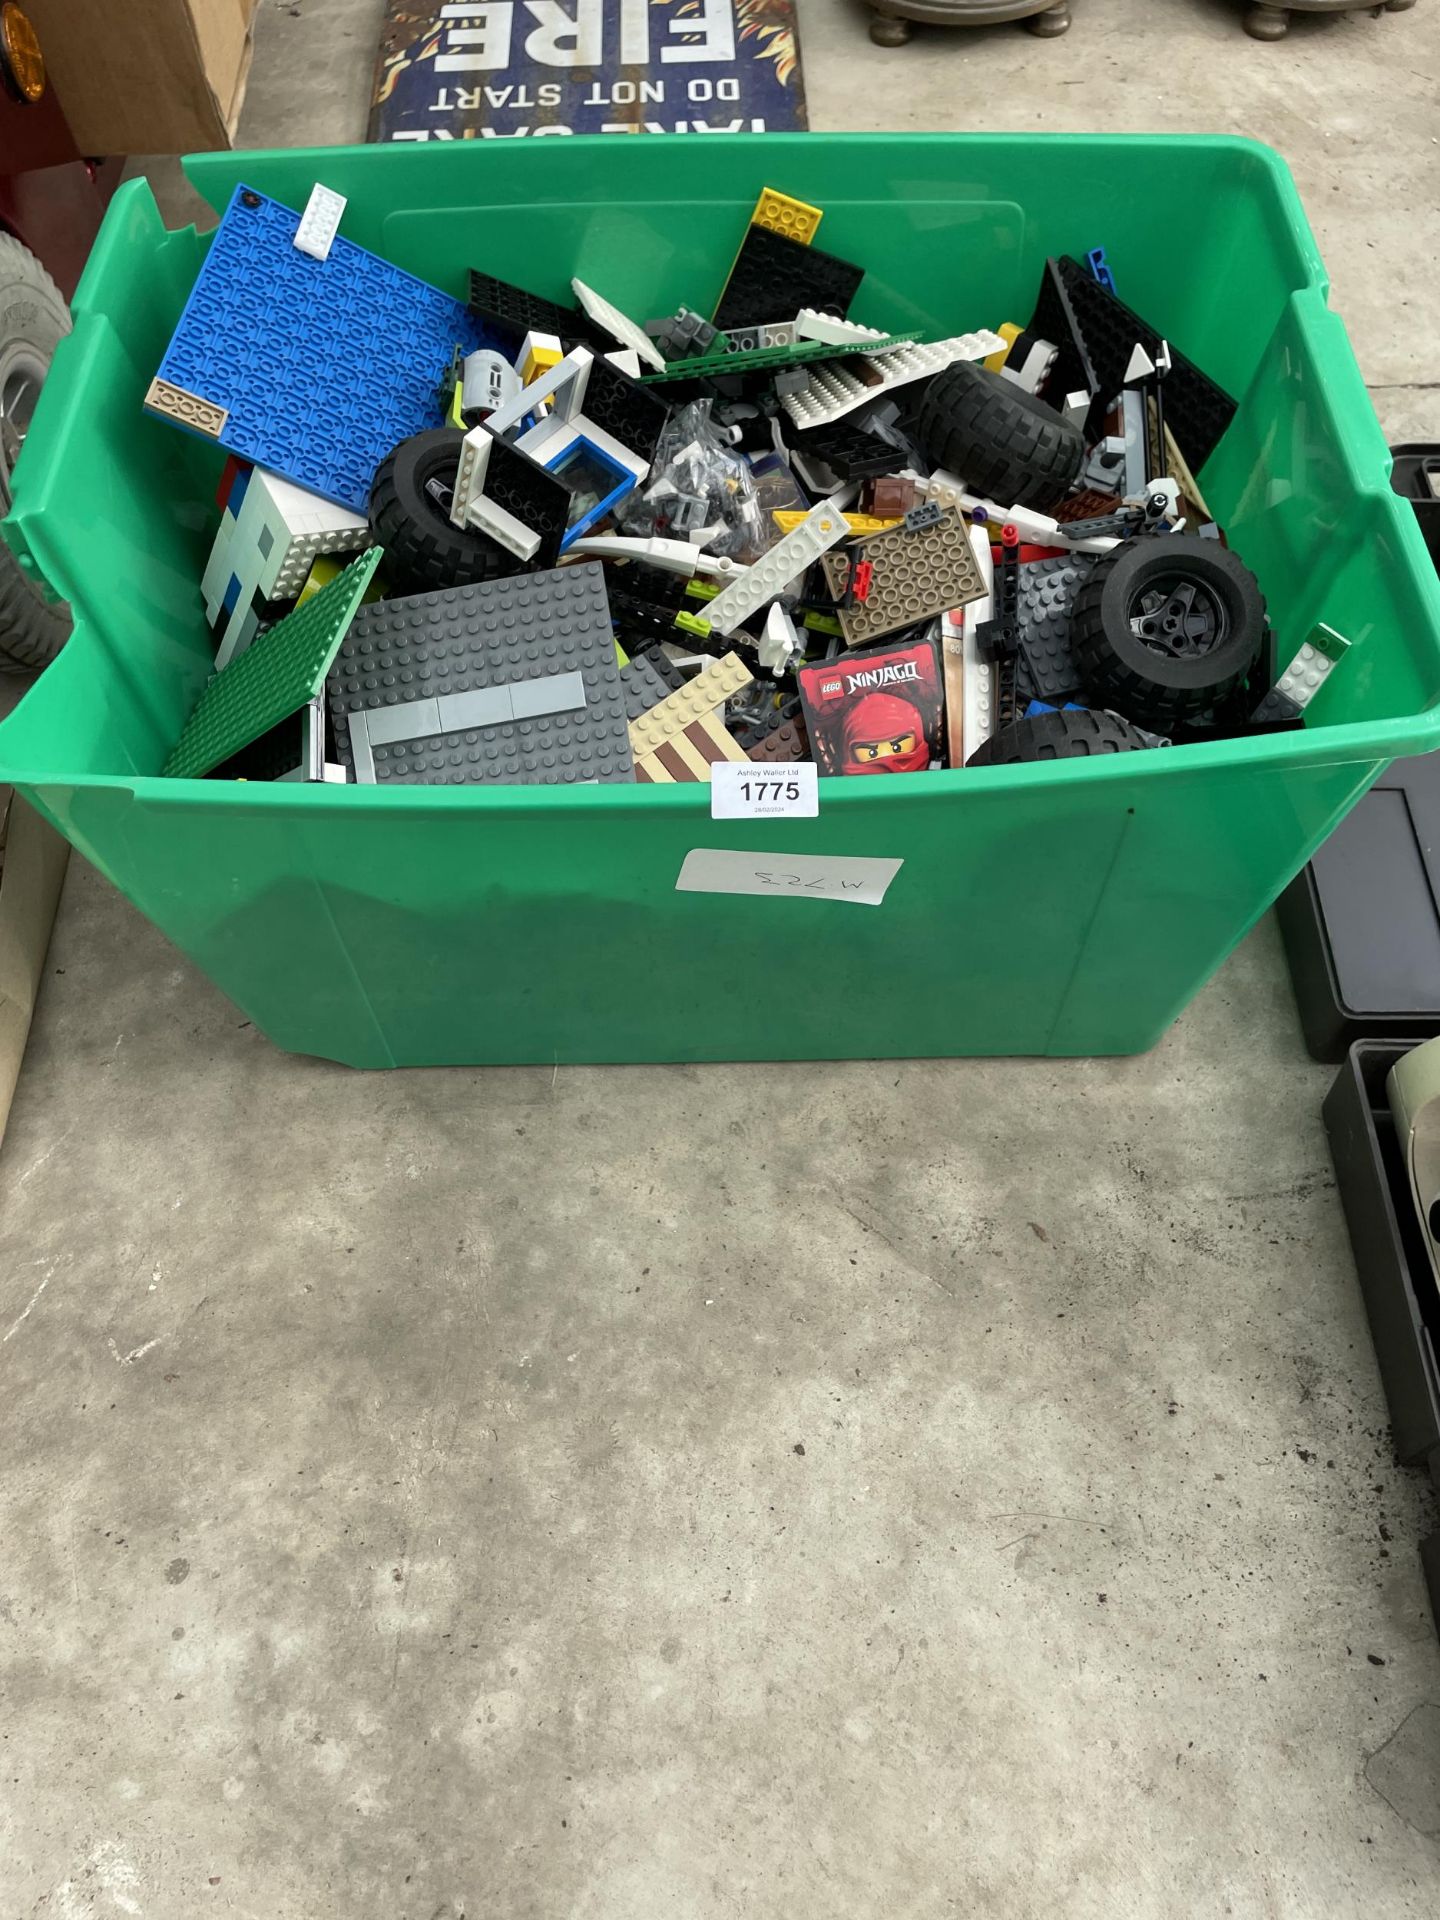 A LARGE BOX OF ASSORTED LEGO